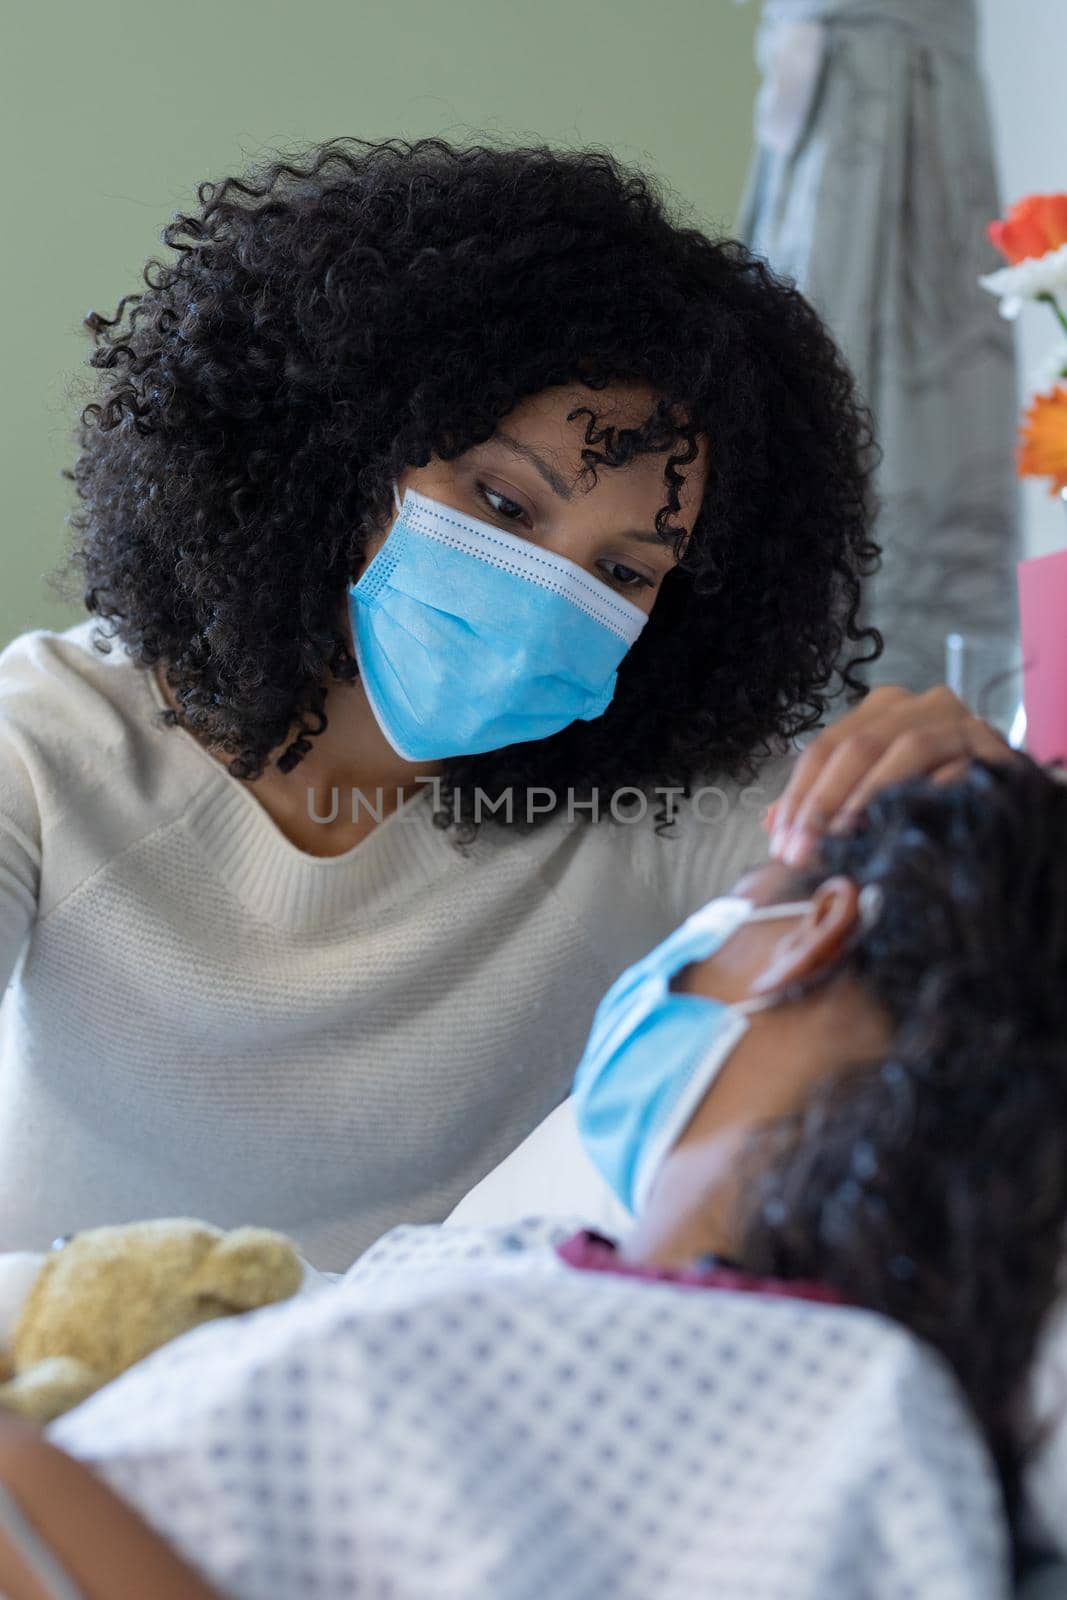 Mixed race mother and sick daughter in face masks in hospital, girl holding teddy bear. medicine, health and healthcare services during covid 19 coronavirus pandemic.